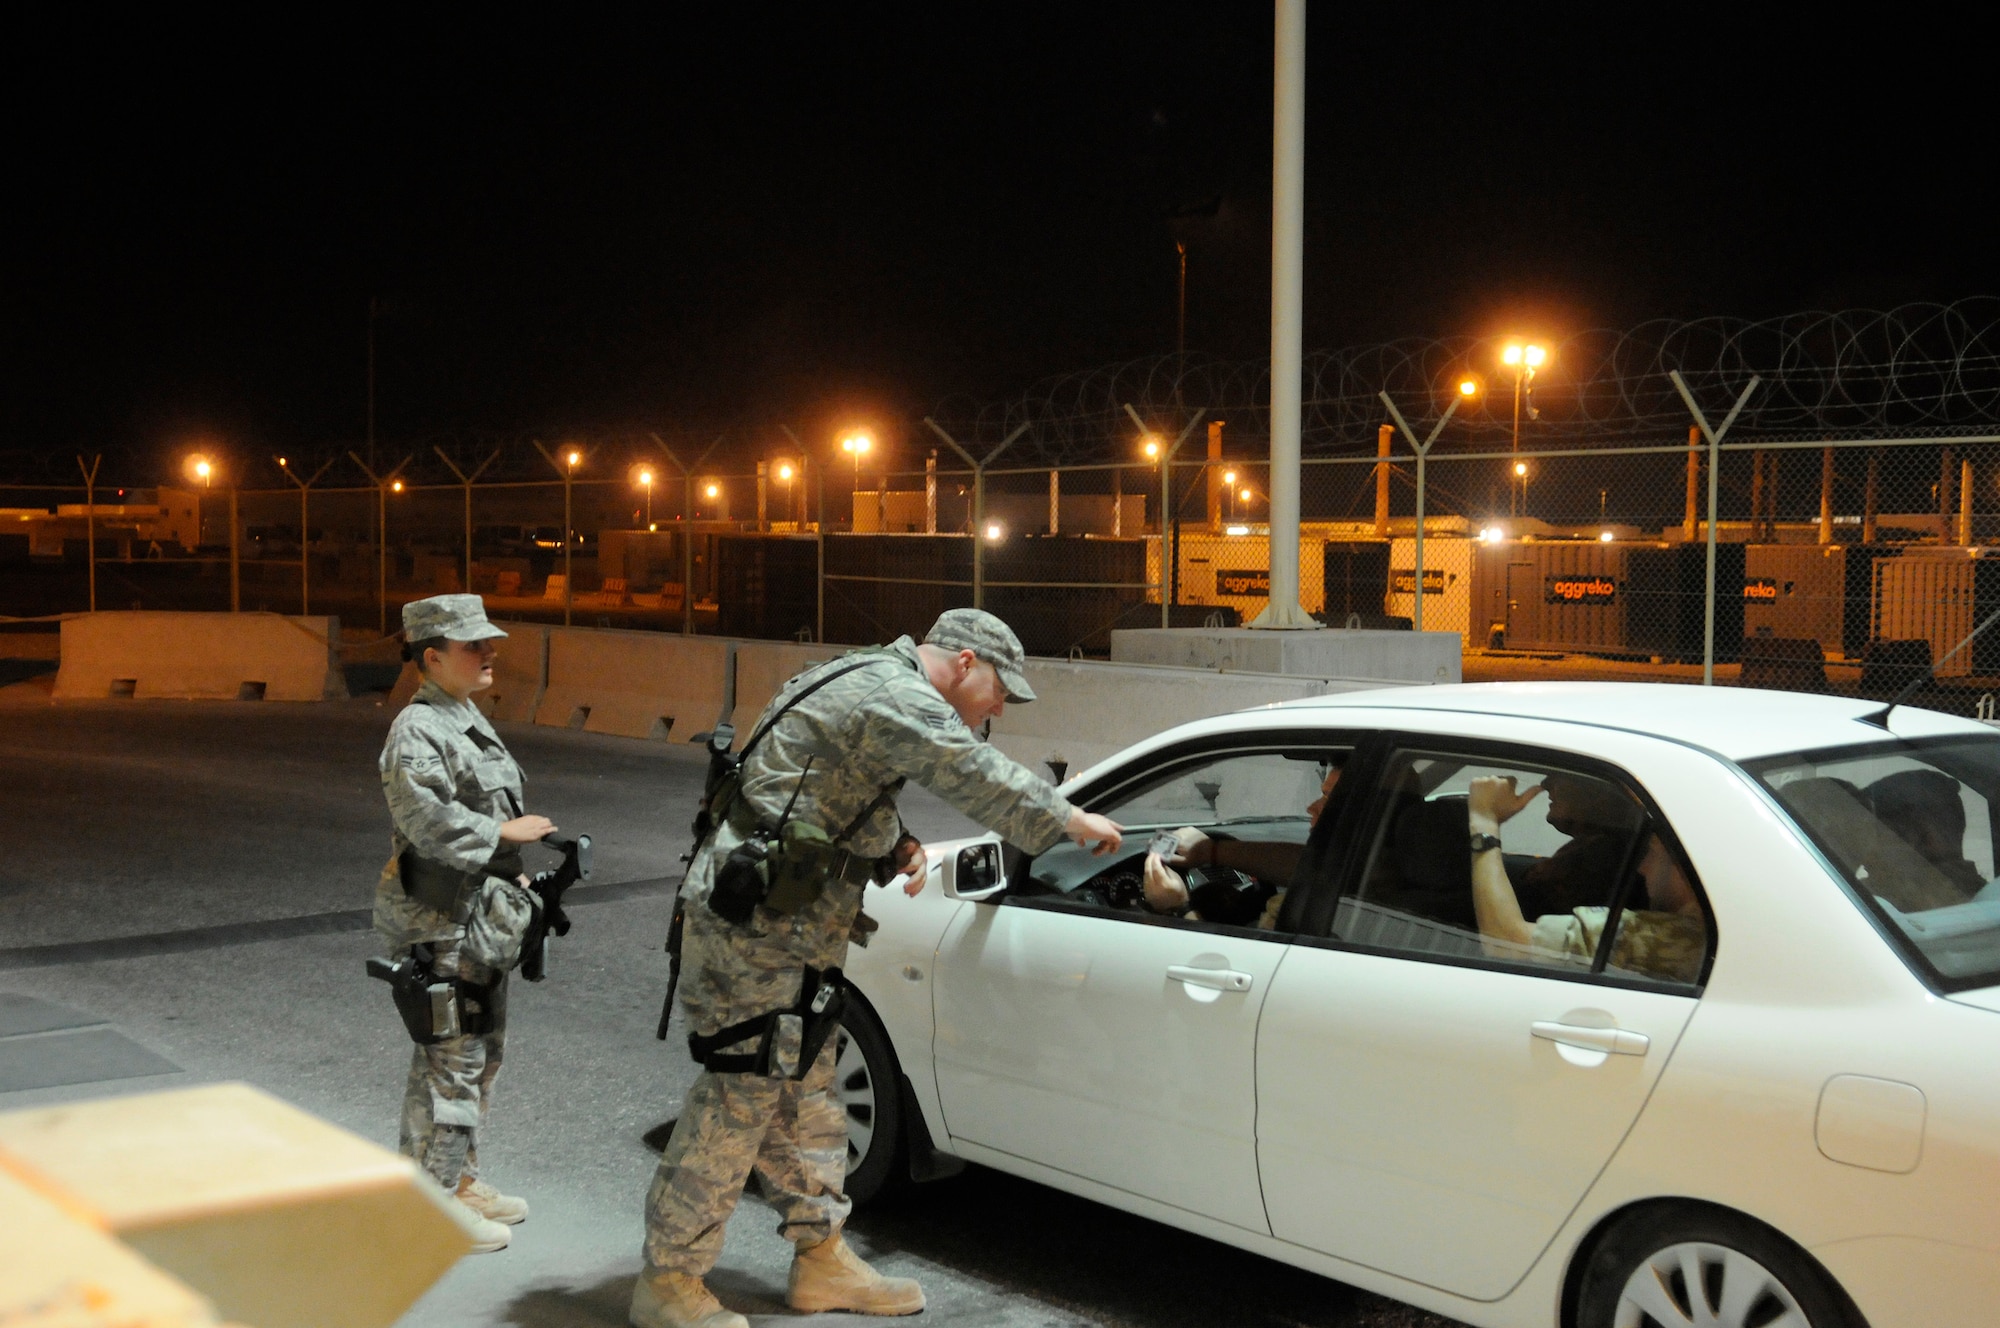 Senior Airman William Baker, 379th Expeditionary Security Forces Squadron, examines a driver's identification prior to allowing the vehicle through a checkpoint, Nov. 21, at an undisclosed air base in Southwest Asia.  Airman 1st Class Kari Kasprzyk, 379 ESFS, provides security back-up from a distance.  Air Force Security Forces members write and implement resource protection, policing and security activities for joint and coalition partners at this Central Command air base.  Airman Baker hails from Frankfurt, Germany, and is deployed from Spangdahlem Air Base, Germany.  Airman Kasprzyk is a native of Enumclaw, Wash., and is deployed from Hill Air Force Base, Utah.  Both Airmen are deployed in support of Operations Iraqi and Enduring Freedom and Joint Task Force-Horn of Africa.  (U.S. Air Force photo by Tech. Sgt. Michael Boquette/Released)